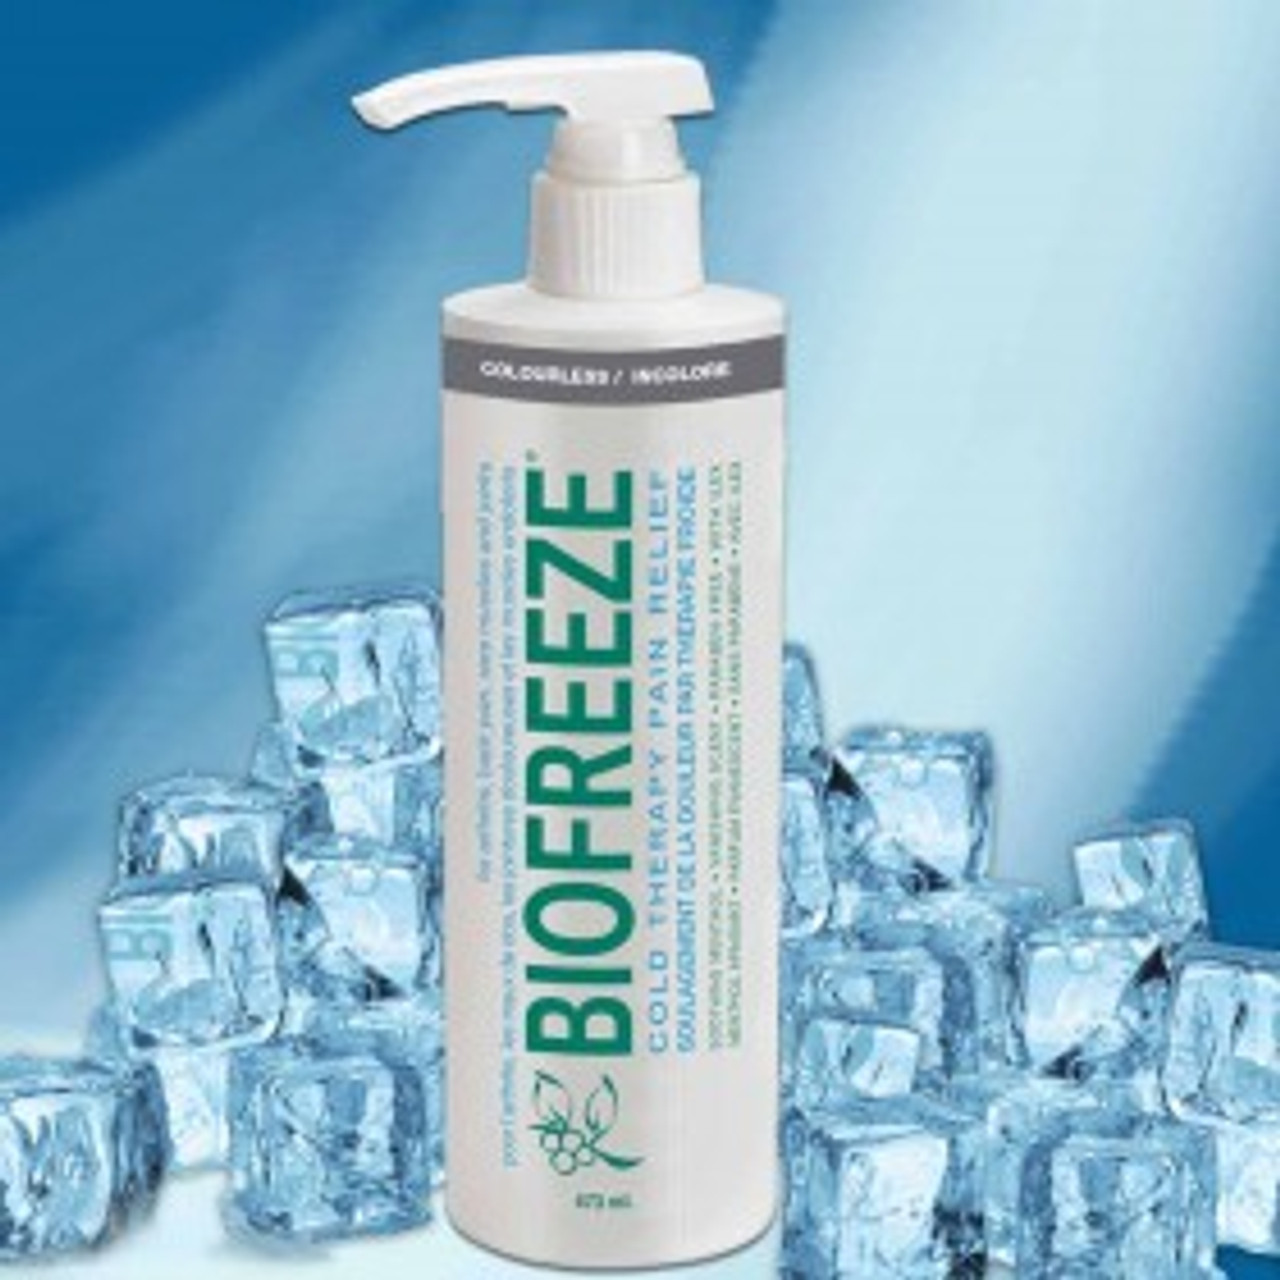 1/EA BIOFREEZE CRYOTHERAPY PAIN RELIEVING GEL PUMP BOTTLE 16OZ DYE AND PARABEN FREE